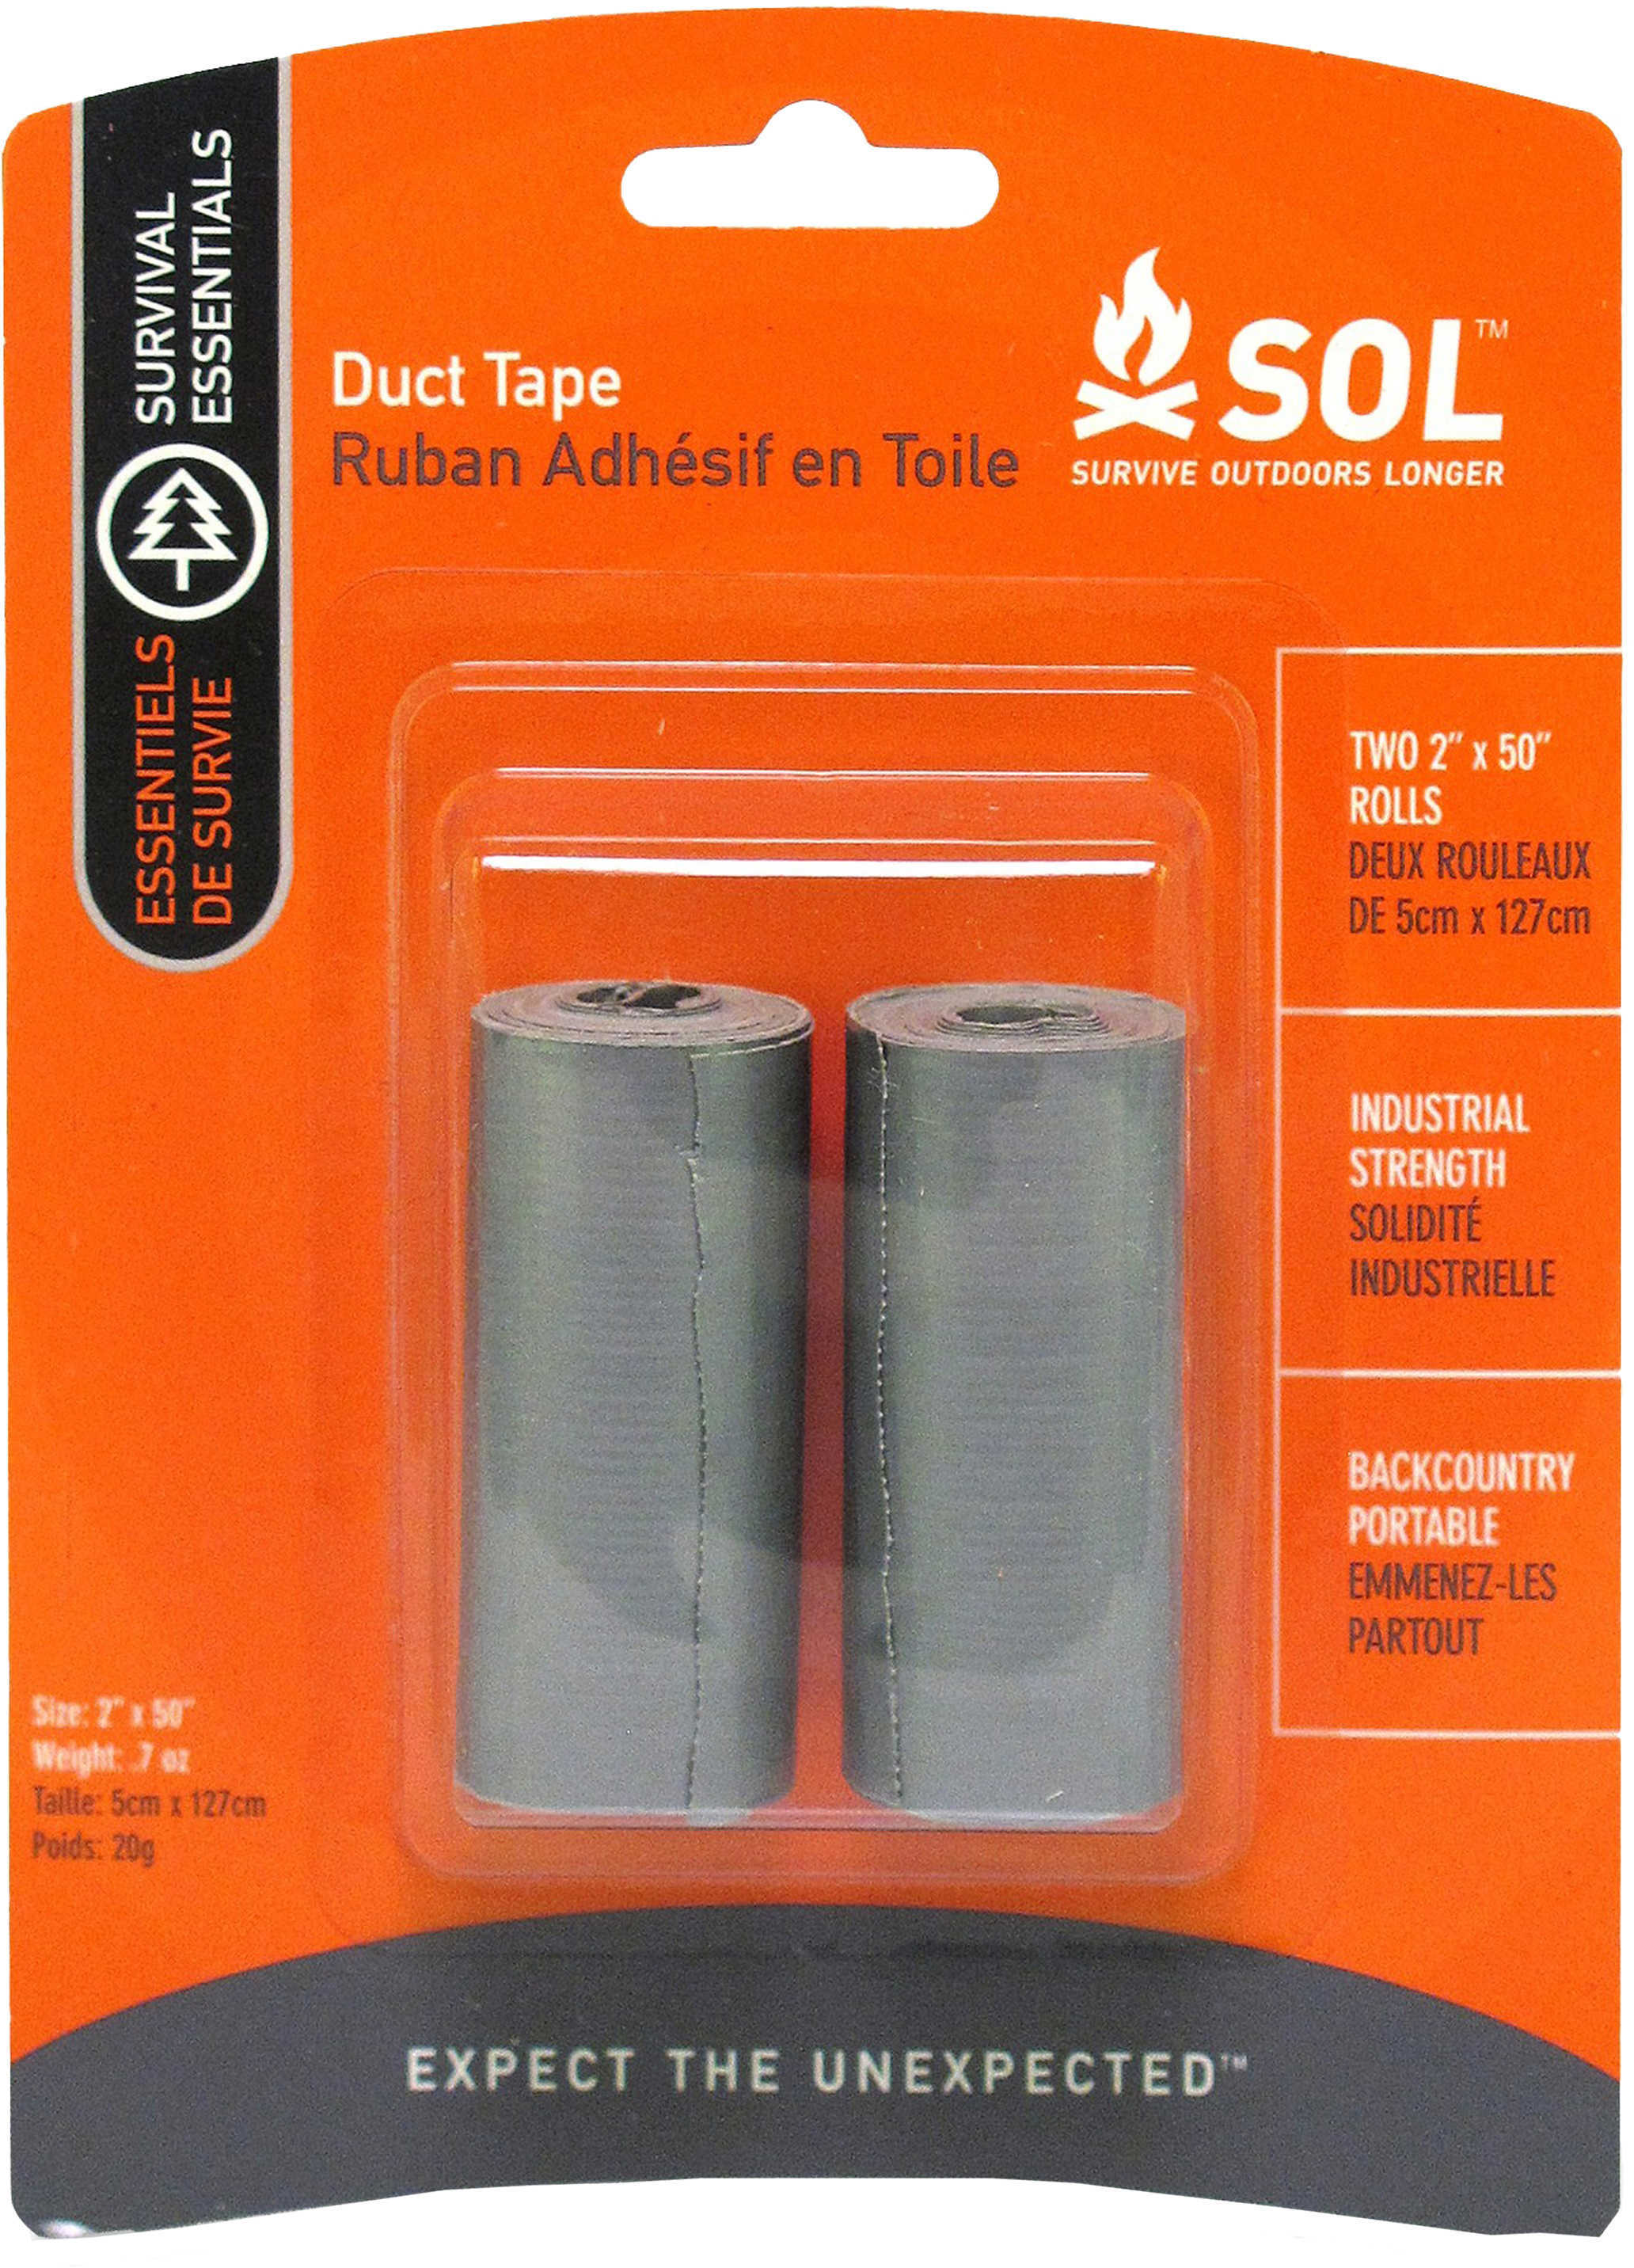 AMK Sol Duct Tape 2 Pack 2"X50" ROLLS